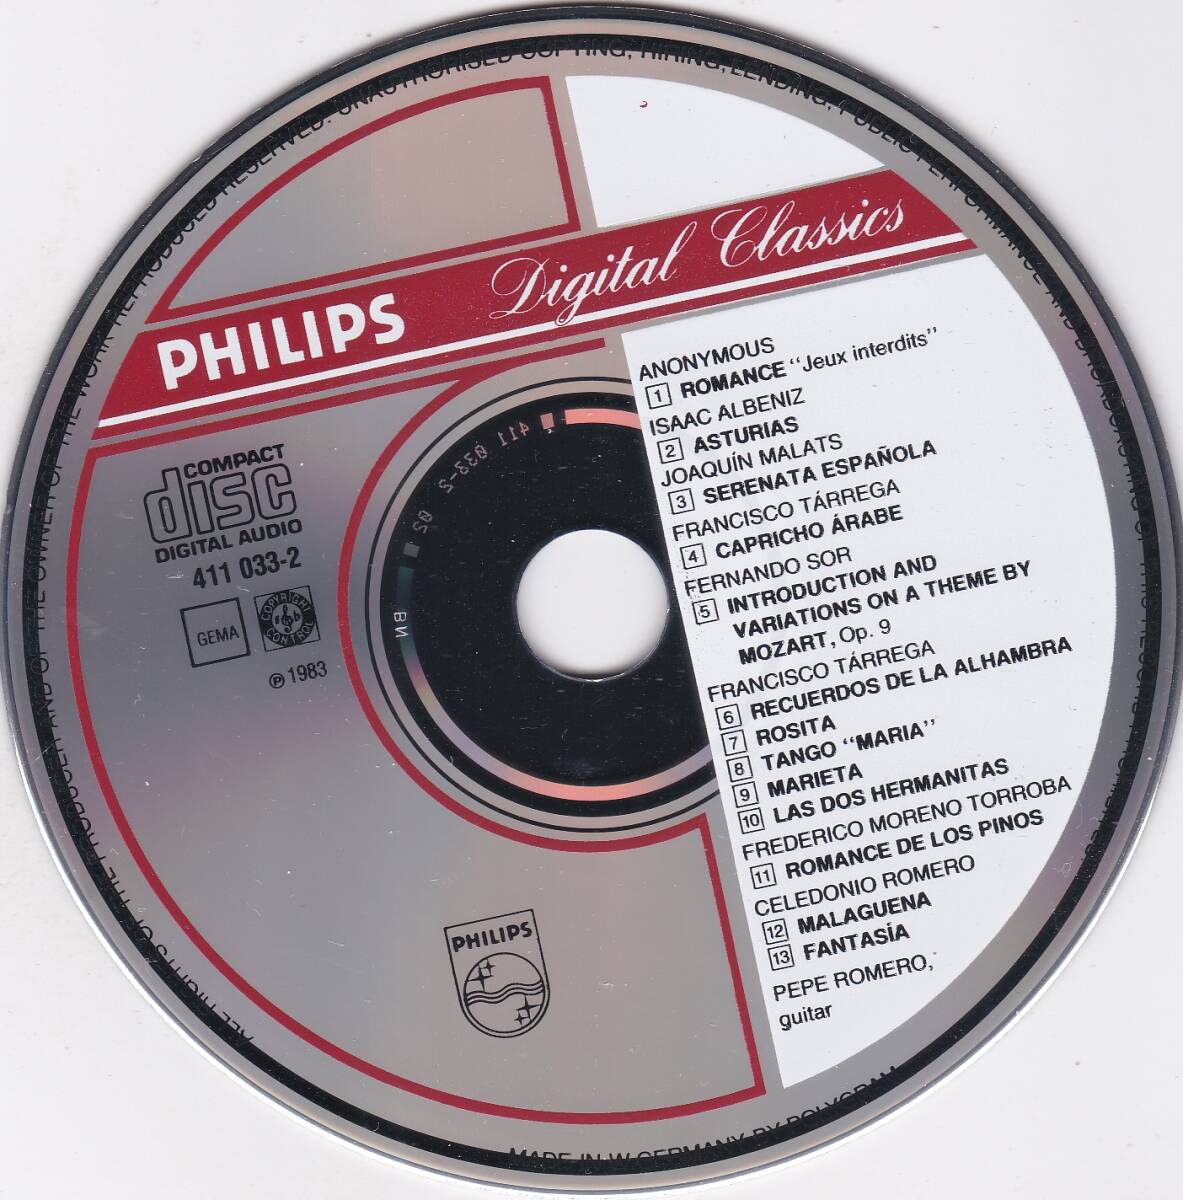 ♪PHILIPS西独盤♪ペペ・ロメロ ギター名曲集 オレンジ帯、日本語解説 Made In W,Germany By PDOの画像3